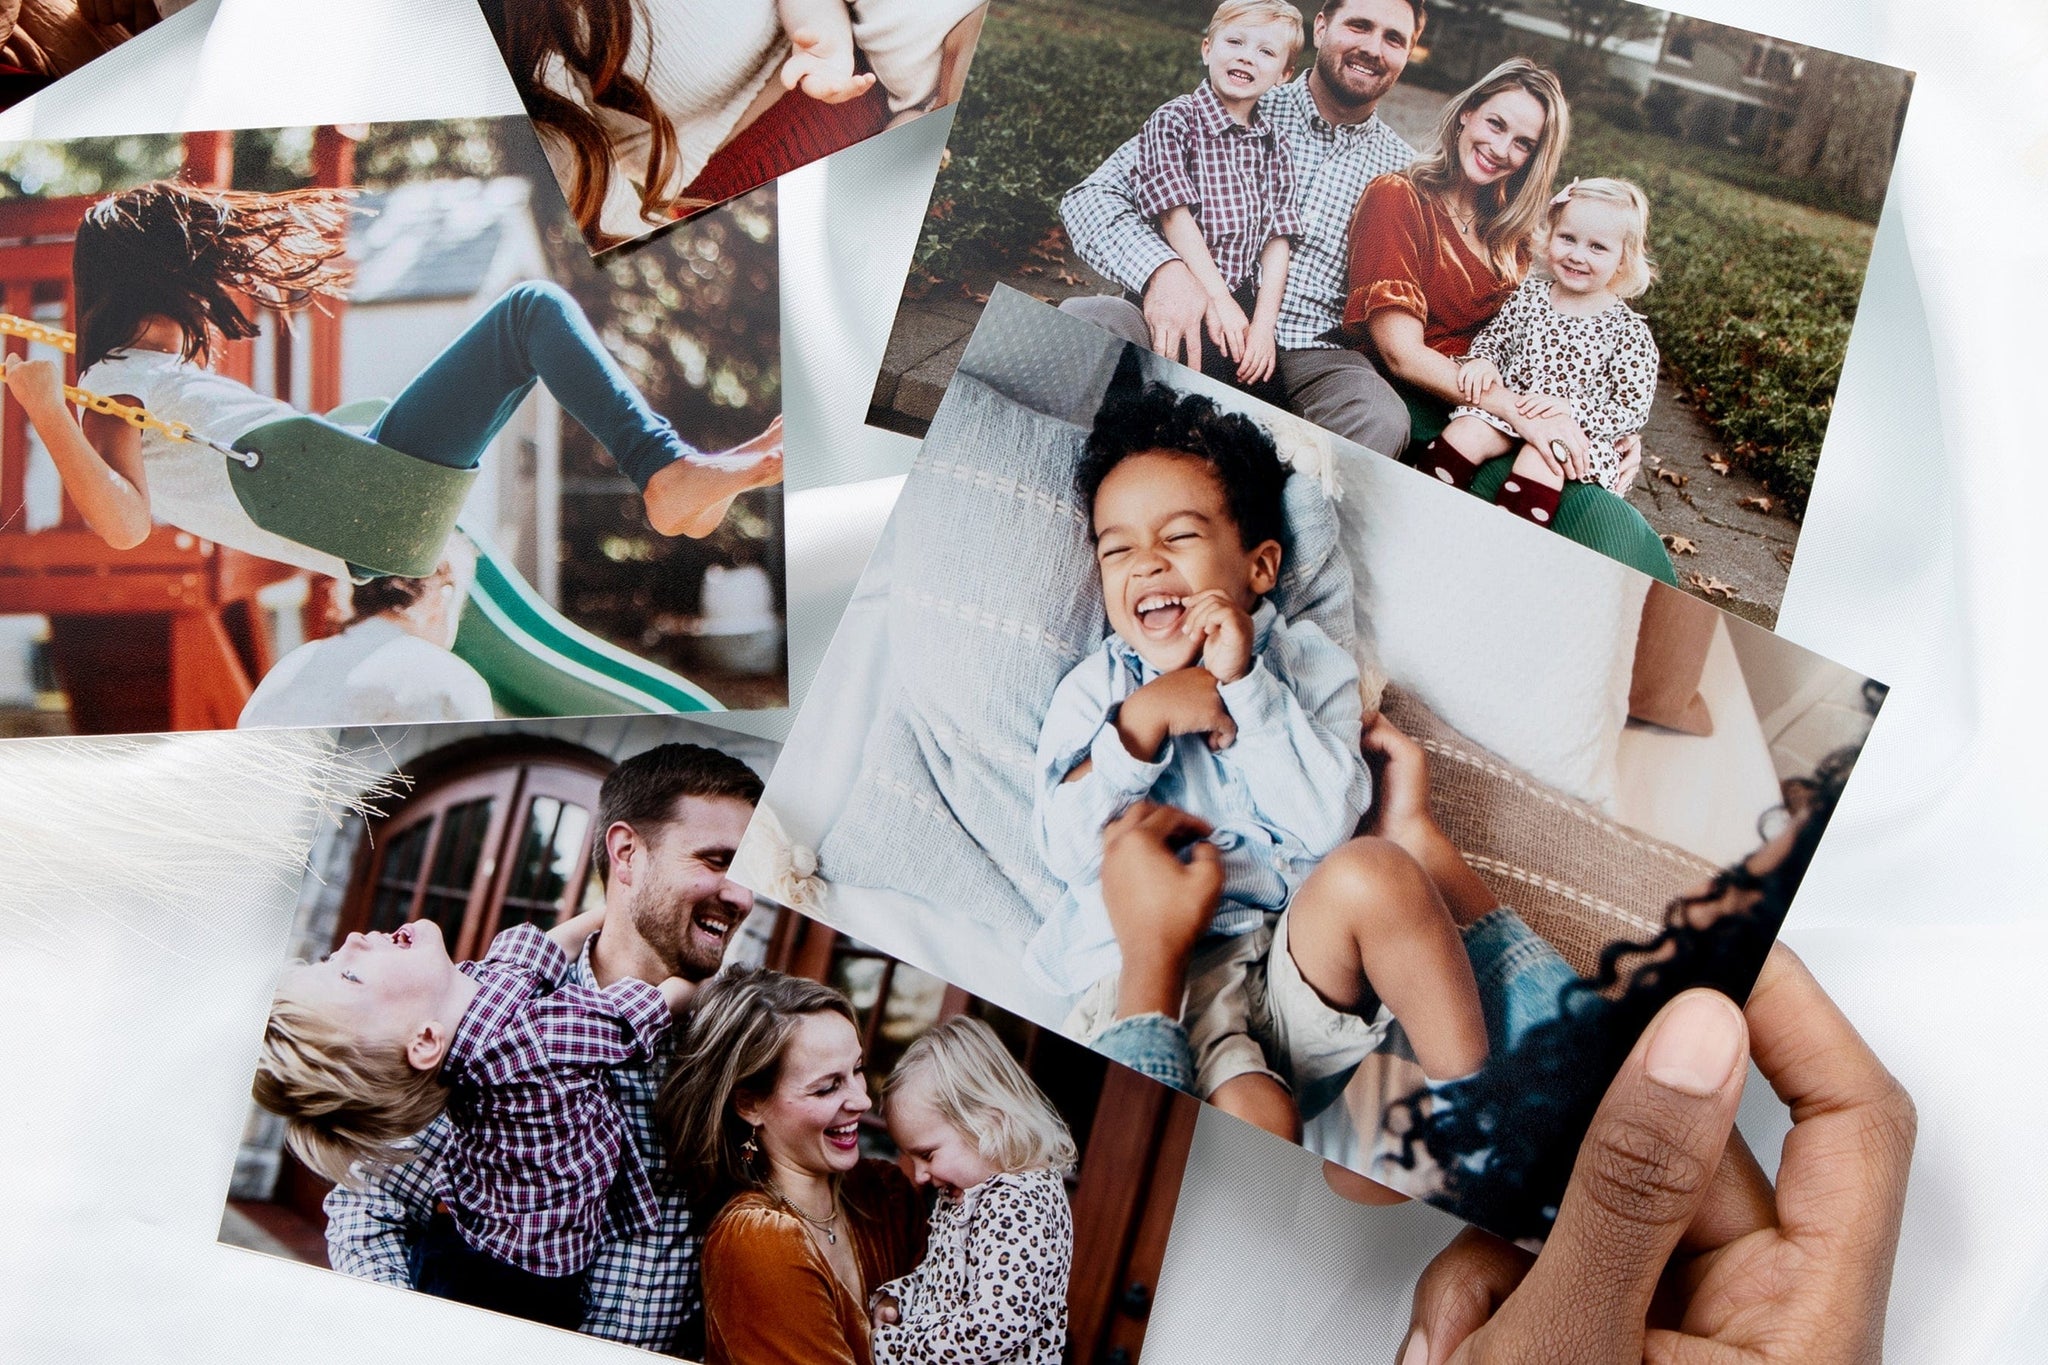 4x6" Photo Prints scattered on a white surface. The Prints feature families and child, one print with a laughing child is being held up by a woman's hand. 